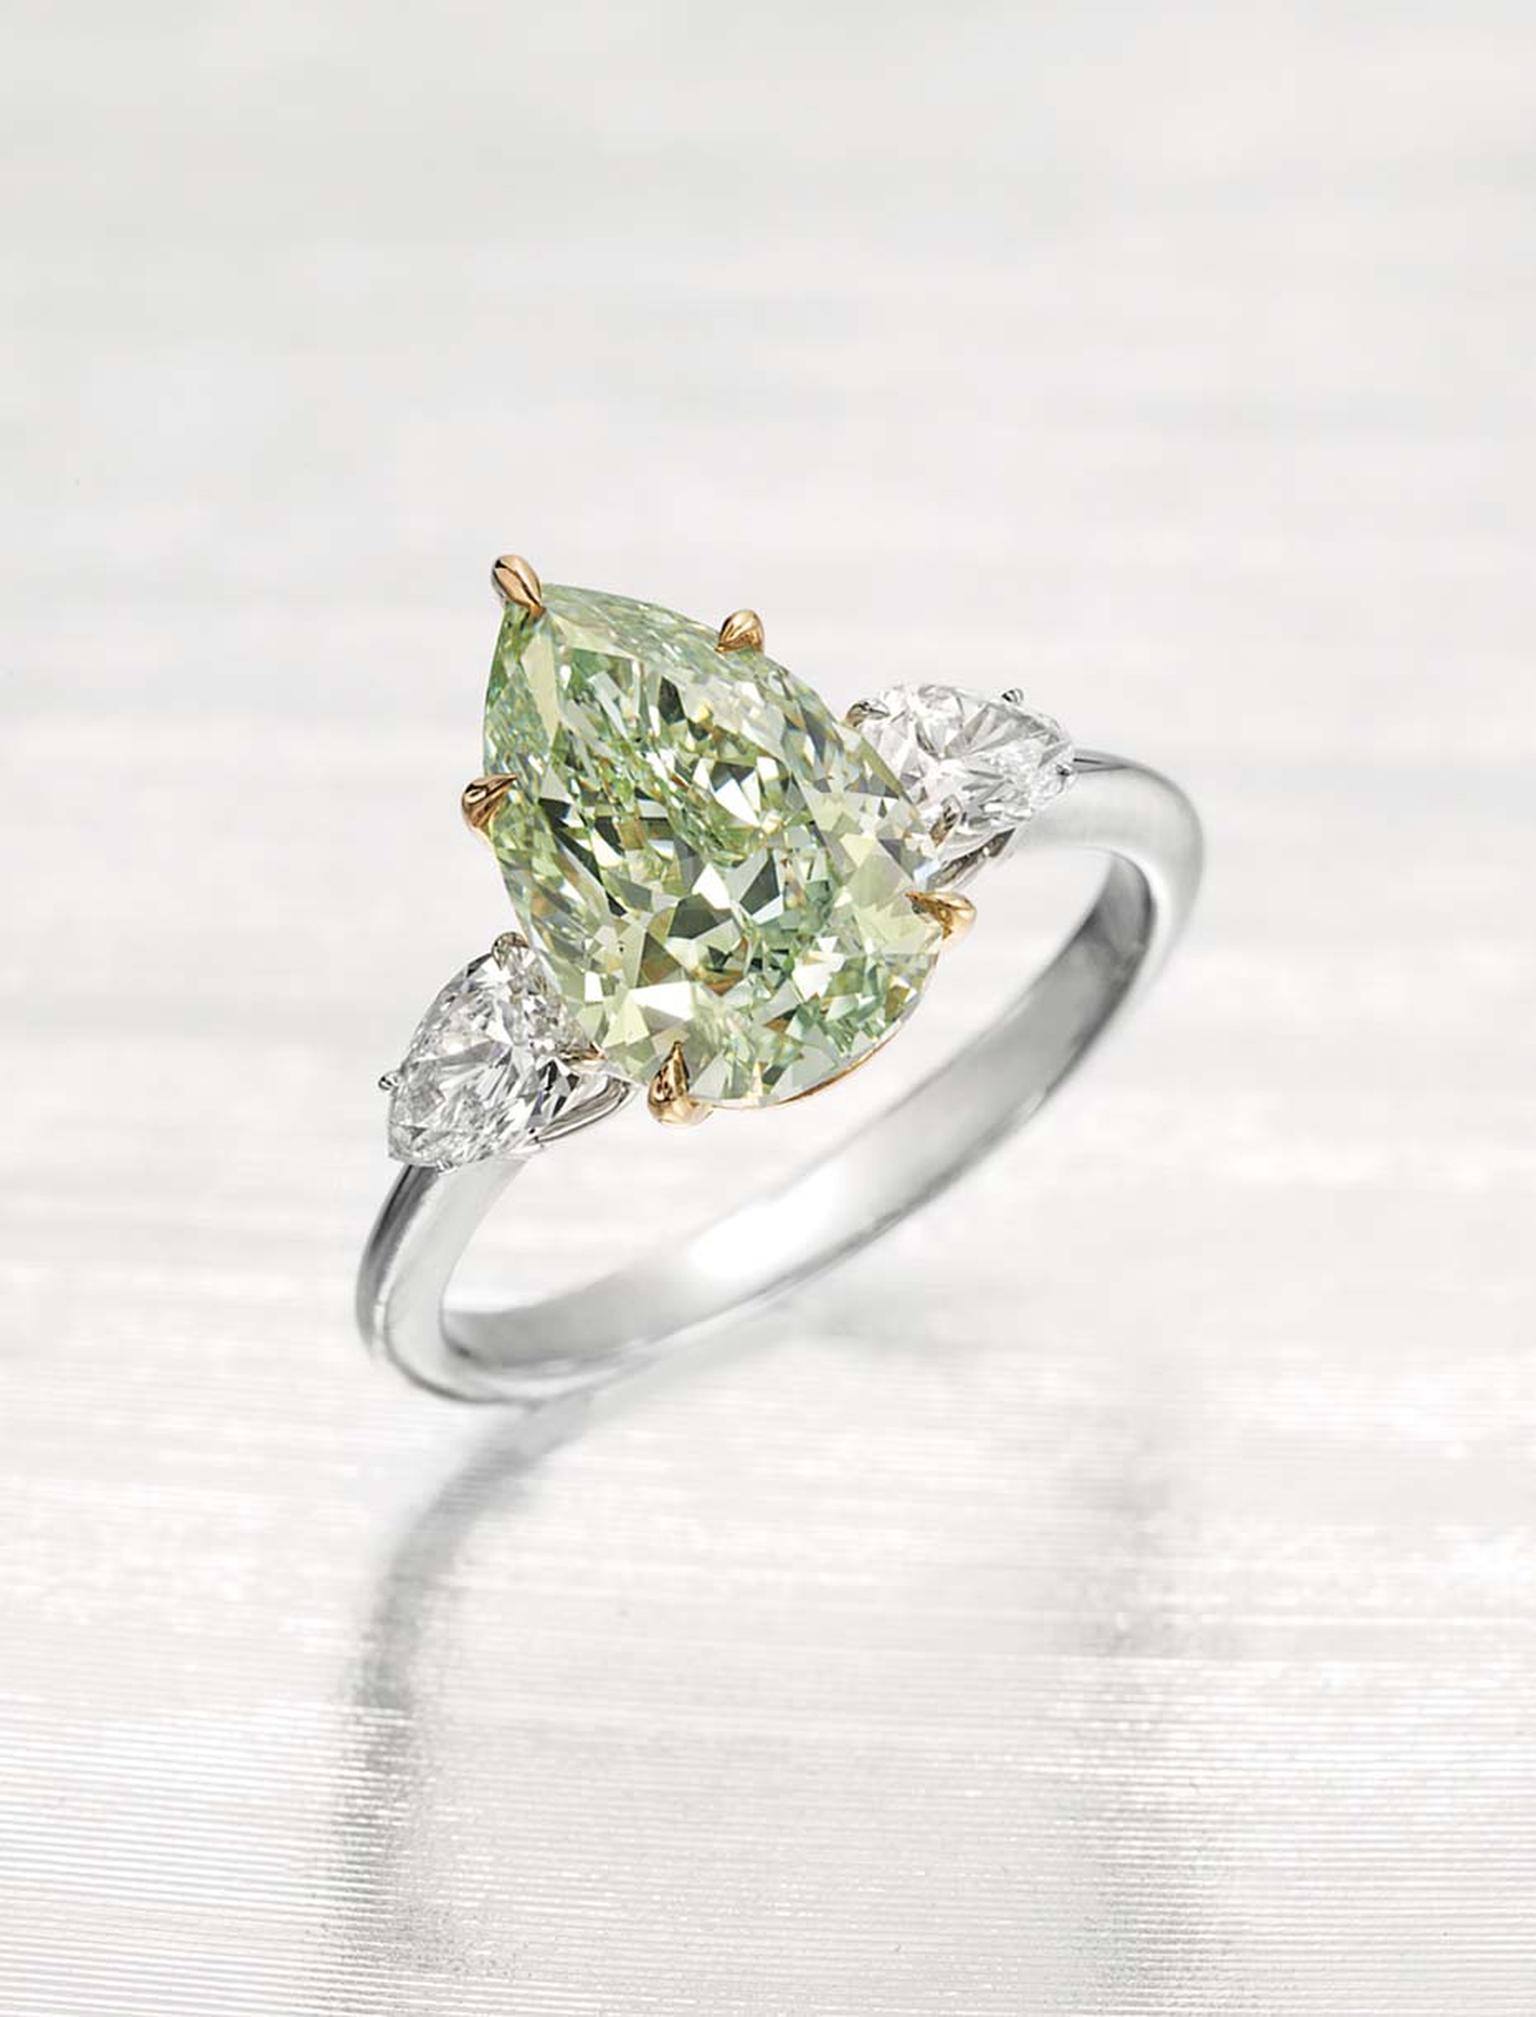 This pear-shaped 3.51ct Fancy Intense green diamond ring, flanked by two white diamonds, was expected to achieve between US$800,000 and $1.2 million no result has been published suggesting it went unsold.